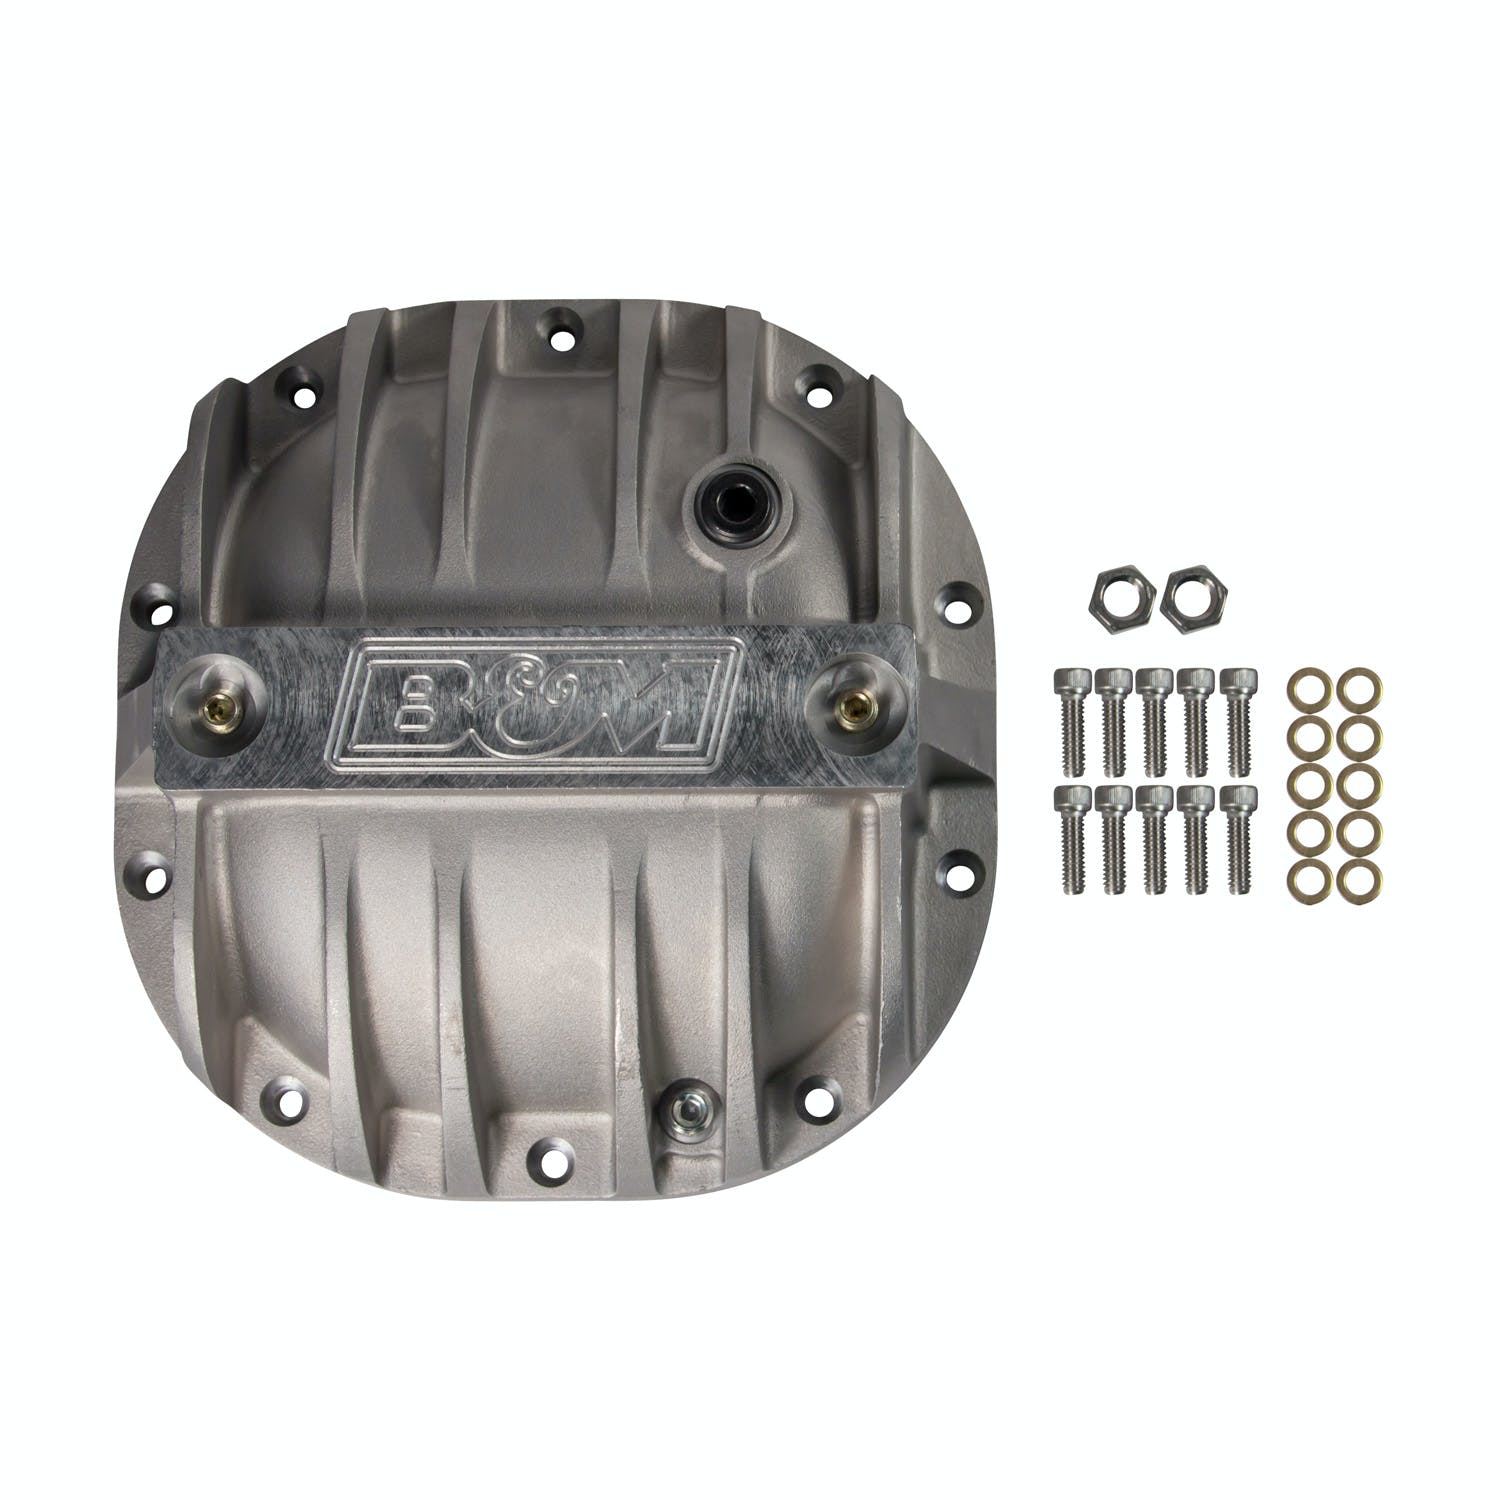 B&M 40297 DIFF COVER FORD 8.8, NATURAL